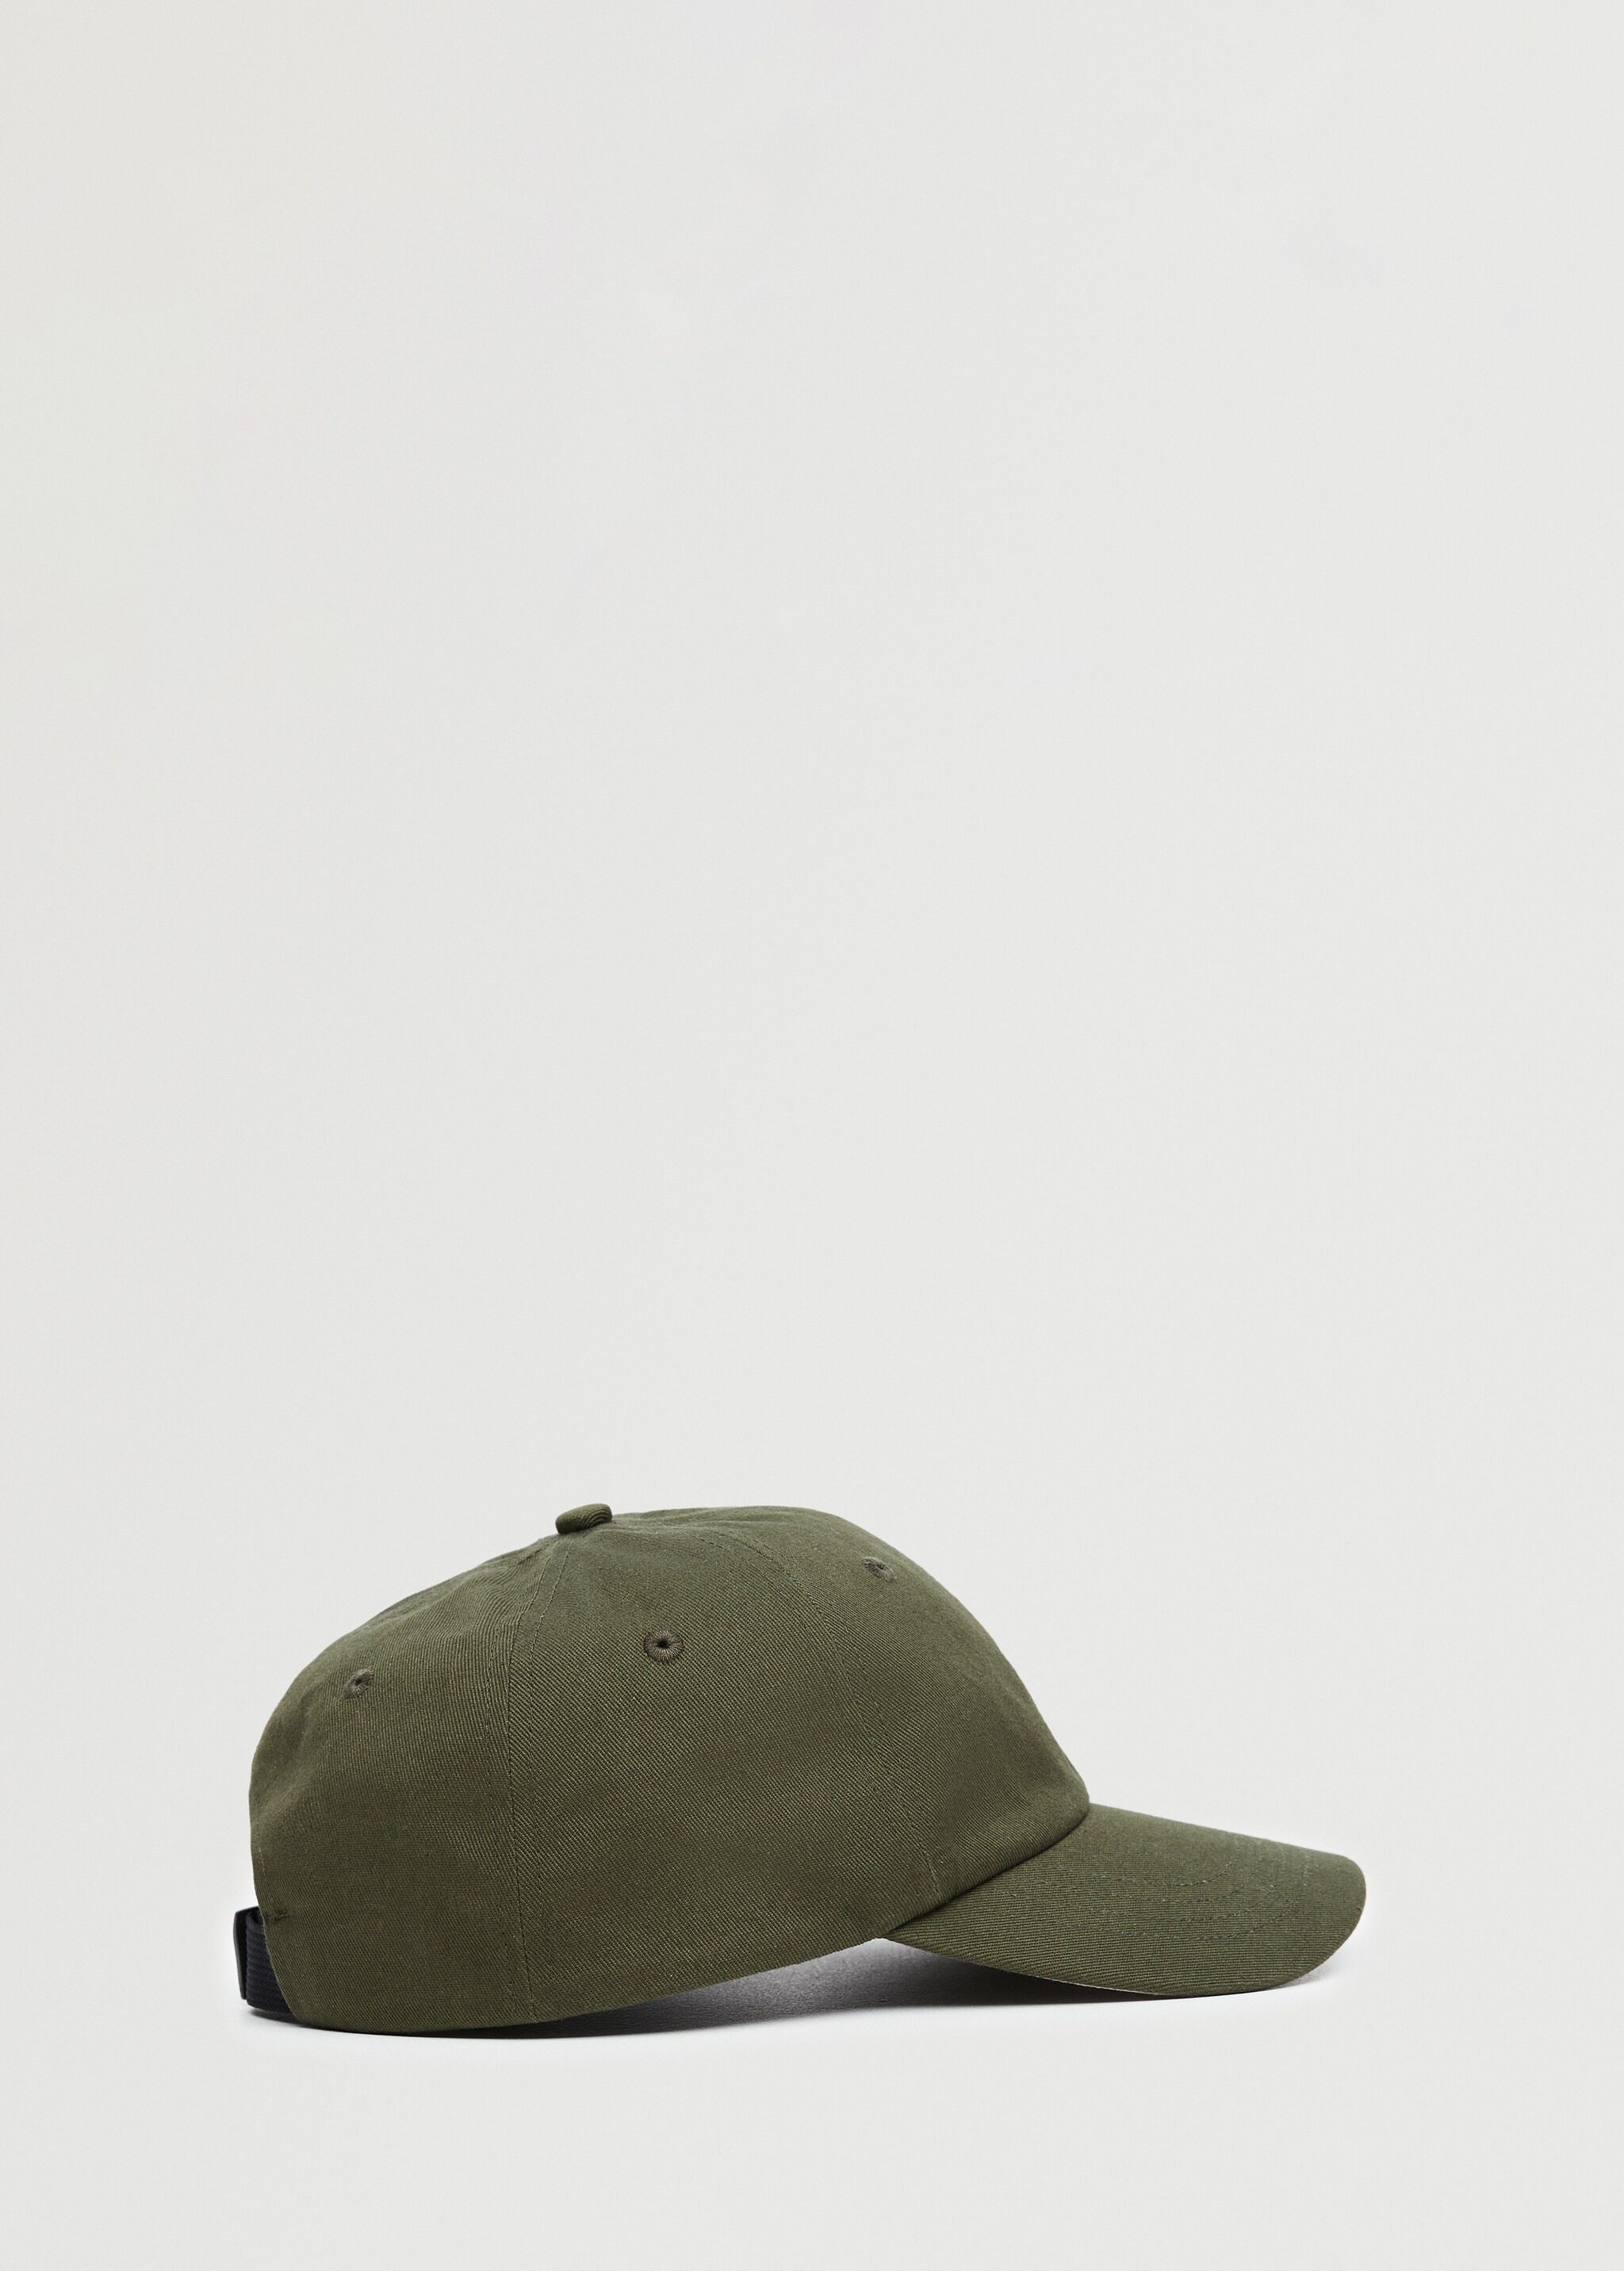 Baseball cap - Article without model